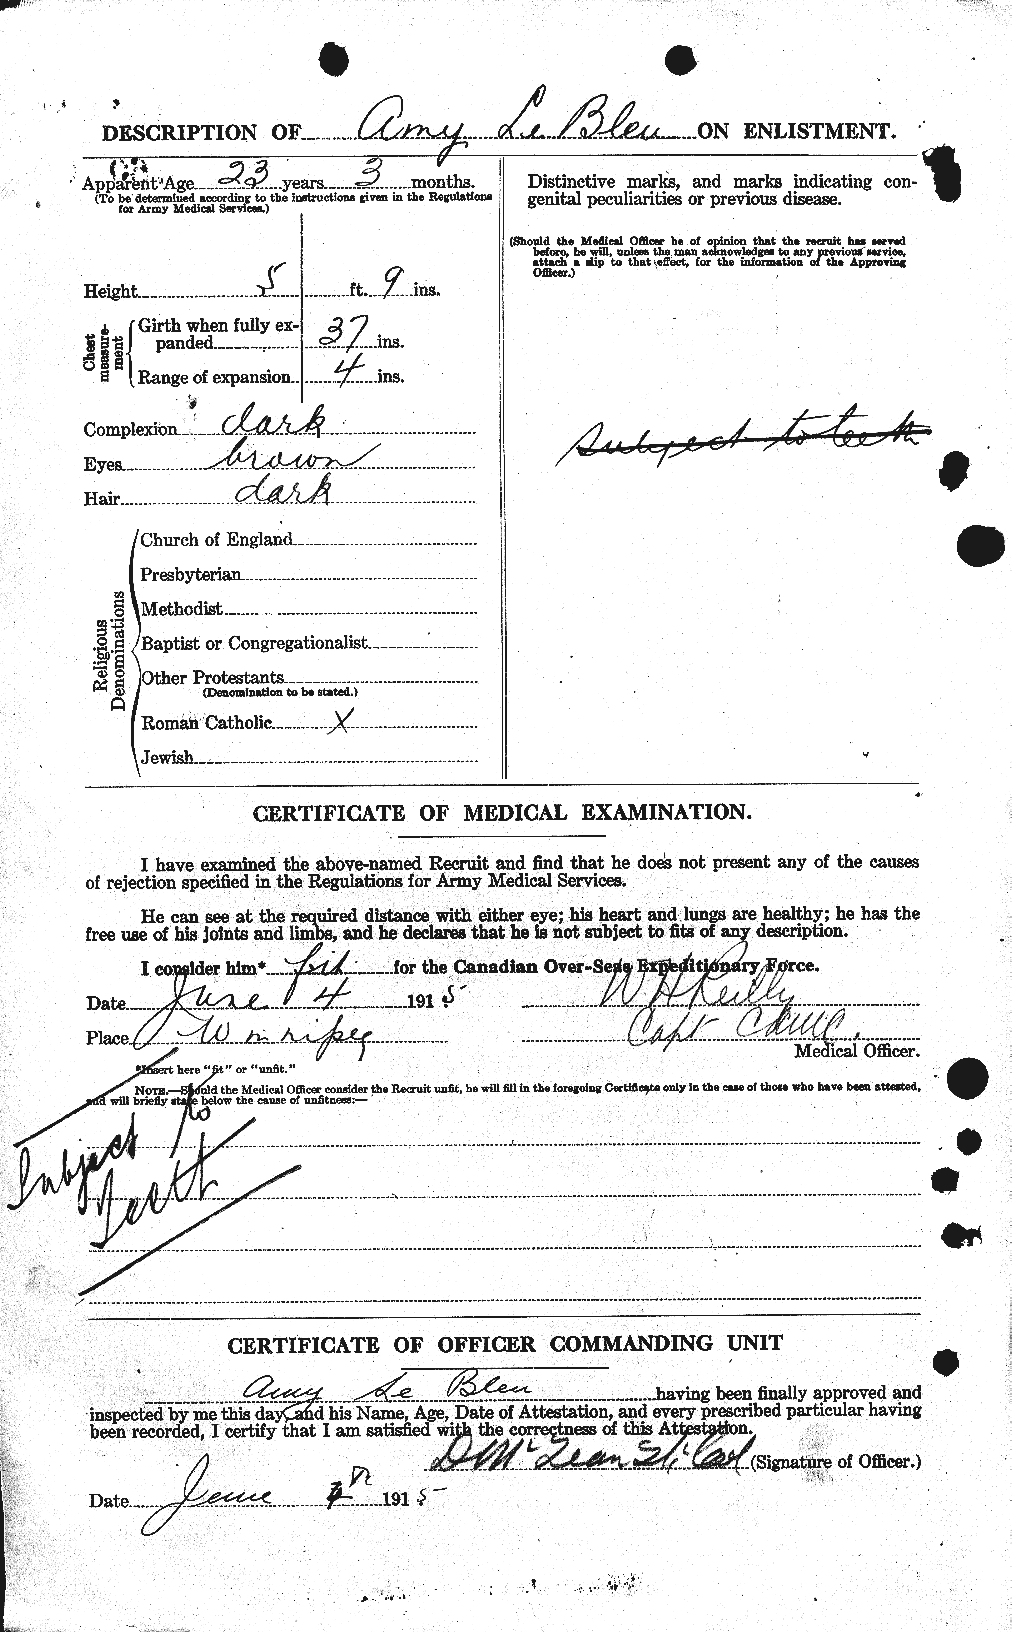 Personnel Records of the First World War - CEF 459484b